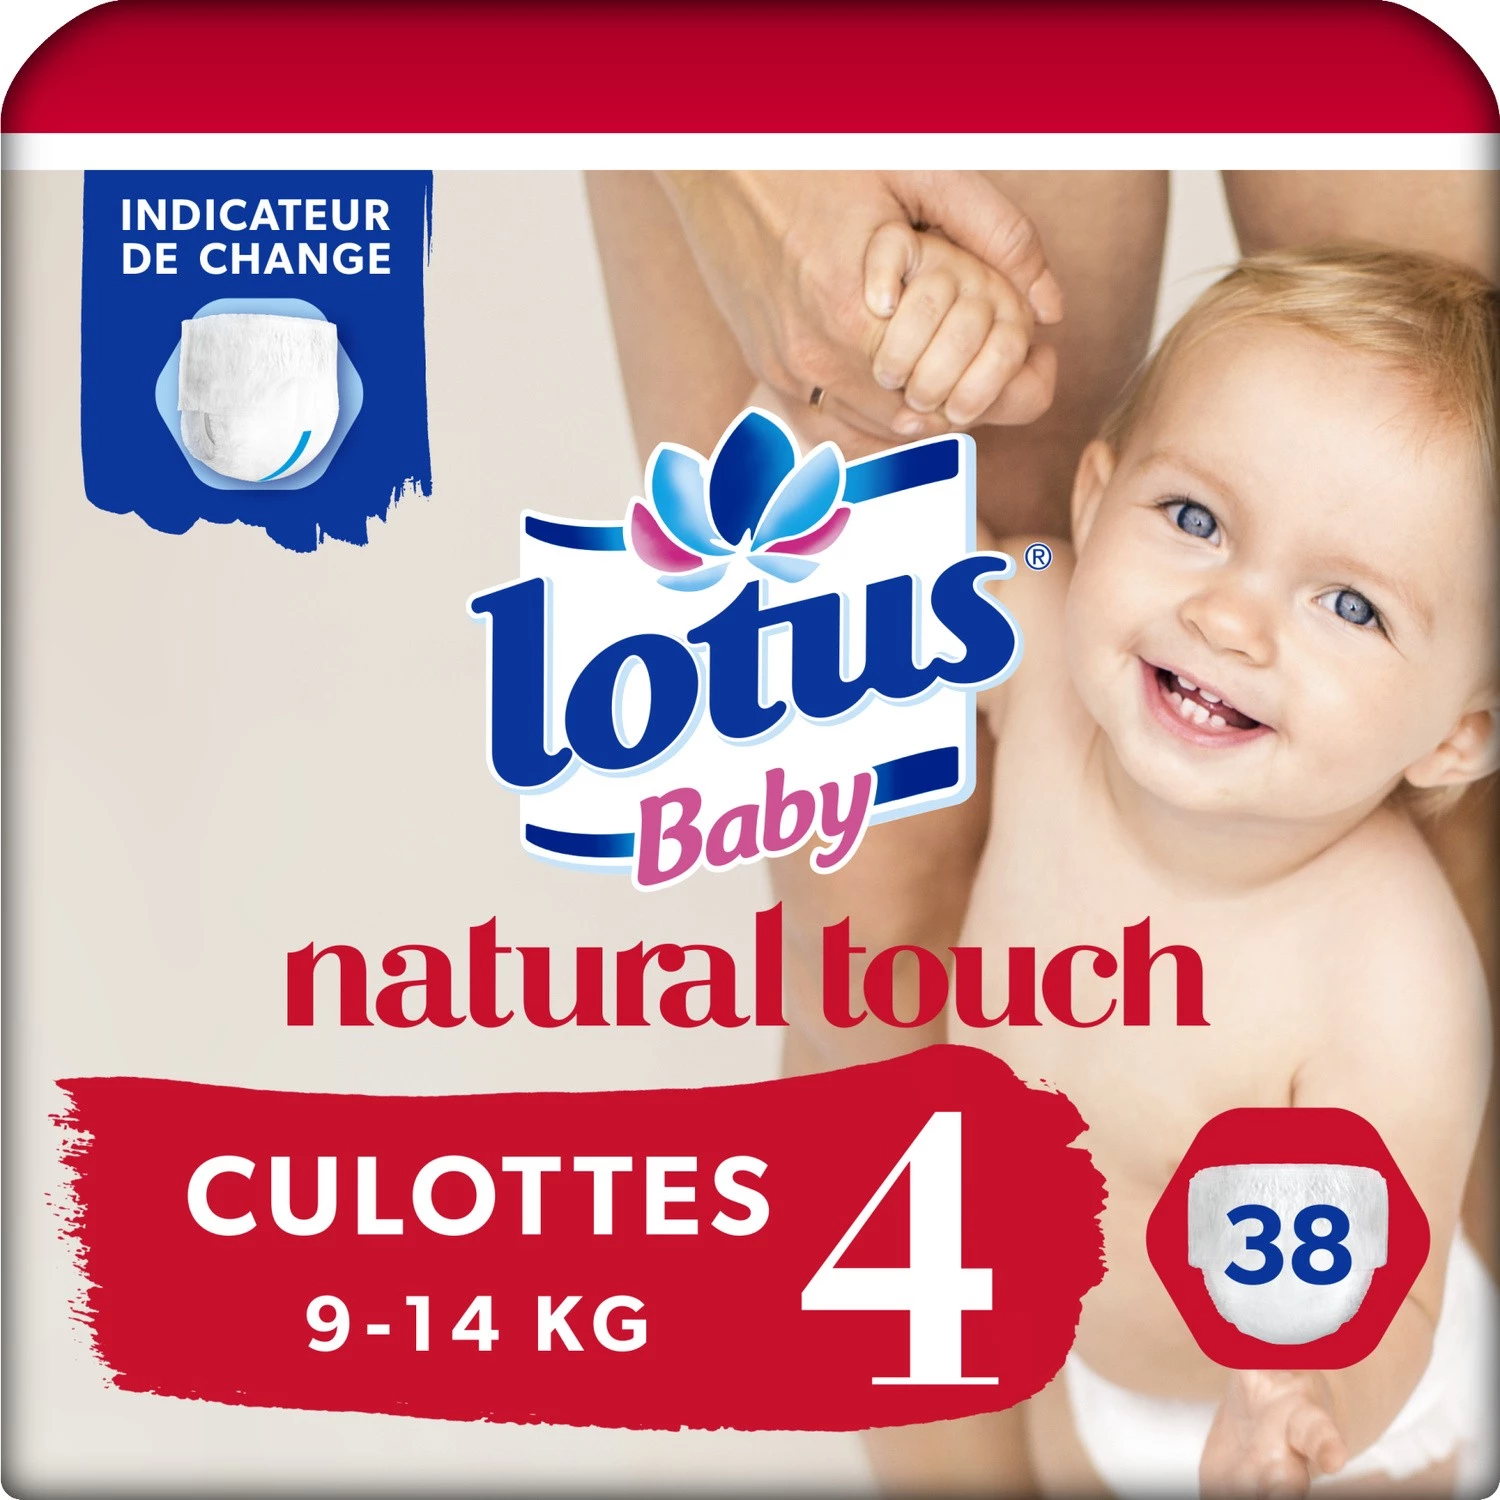 Couches-coulottes natural touch T4 x38 - LOTUS BABY